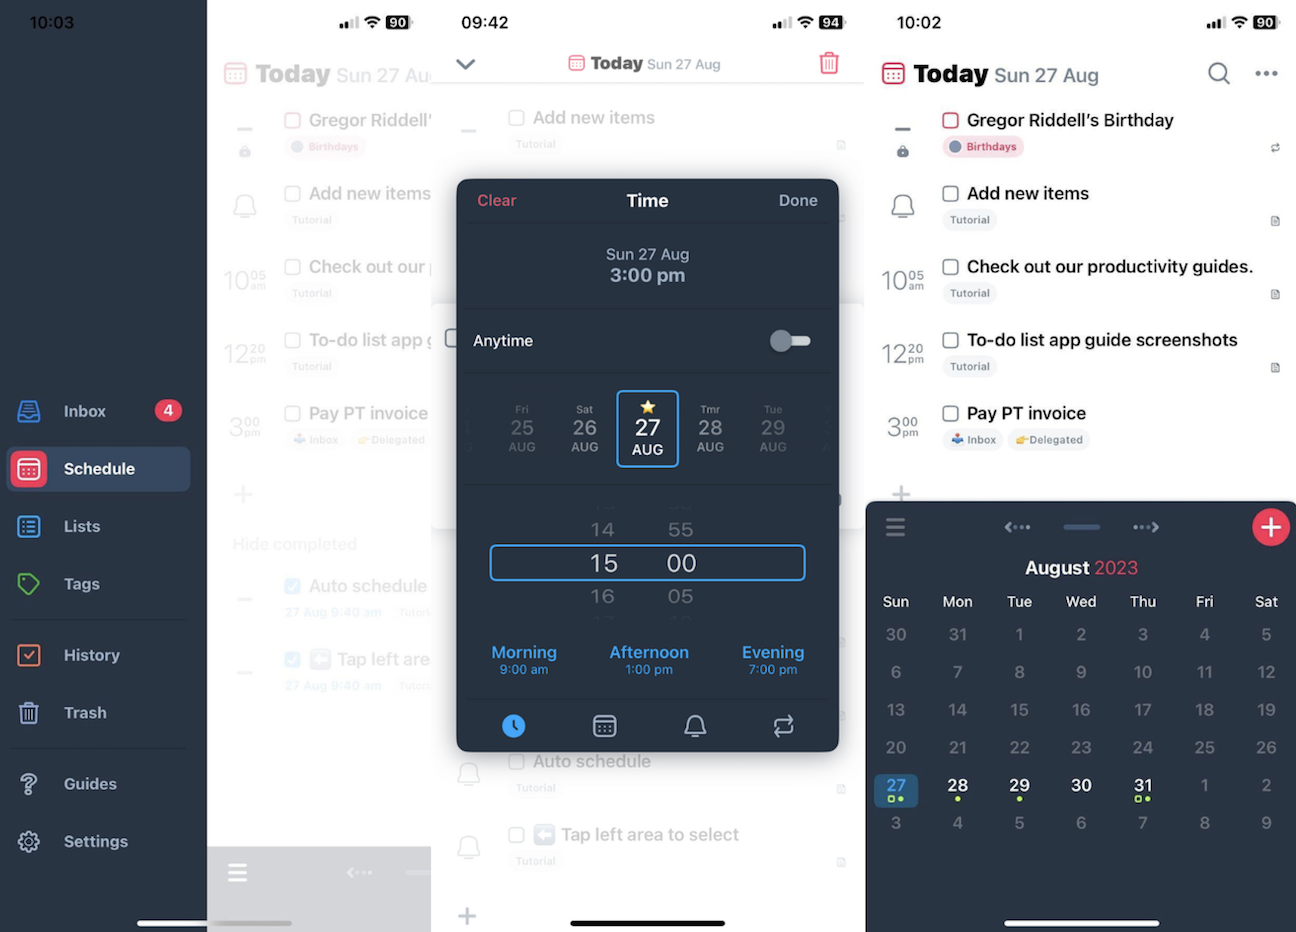 Sorted, our pick for the best iPhone to-do list app for time blocking